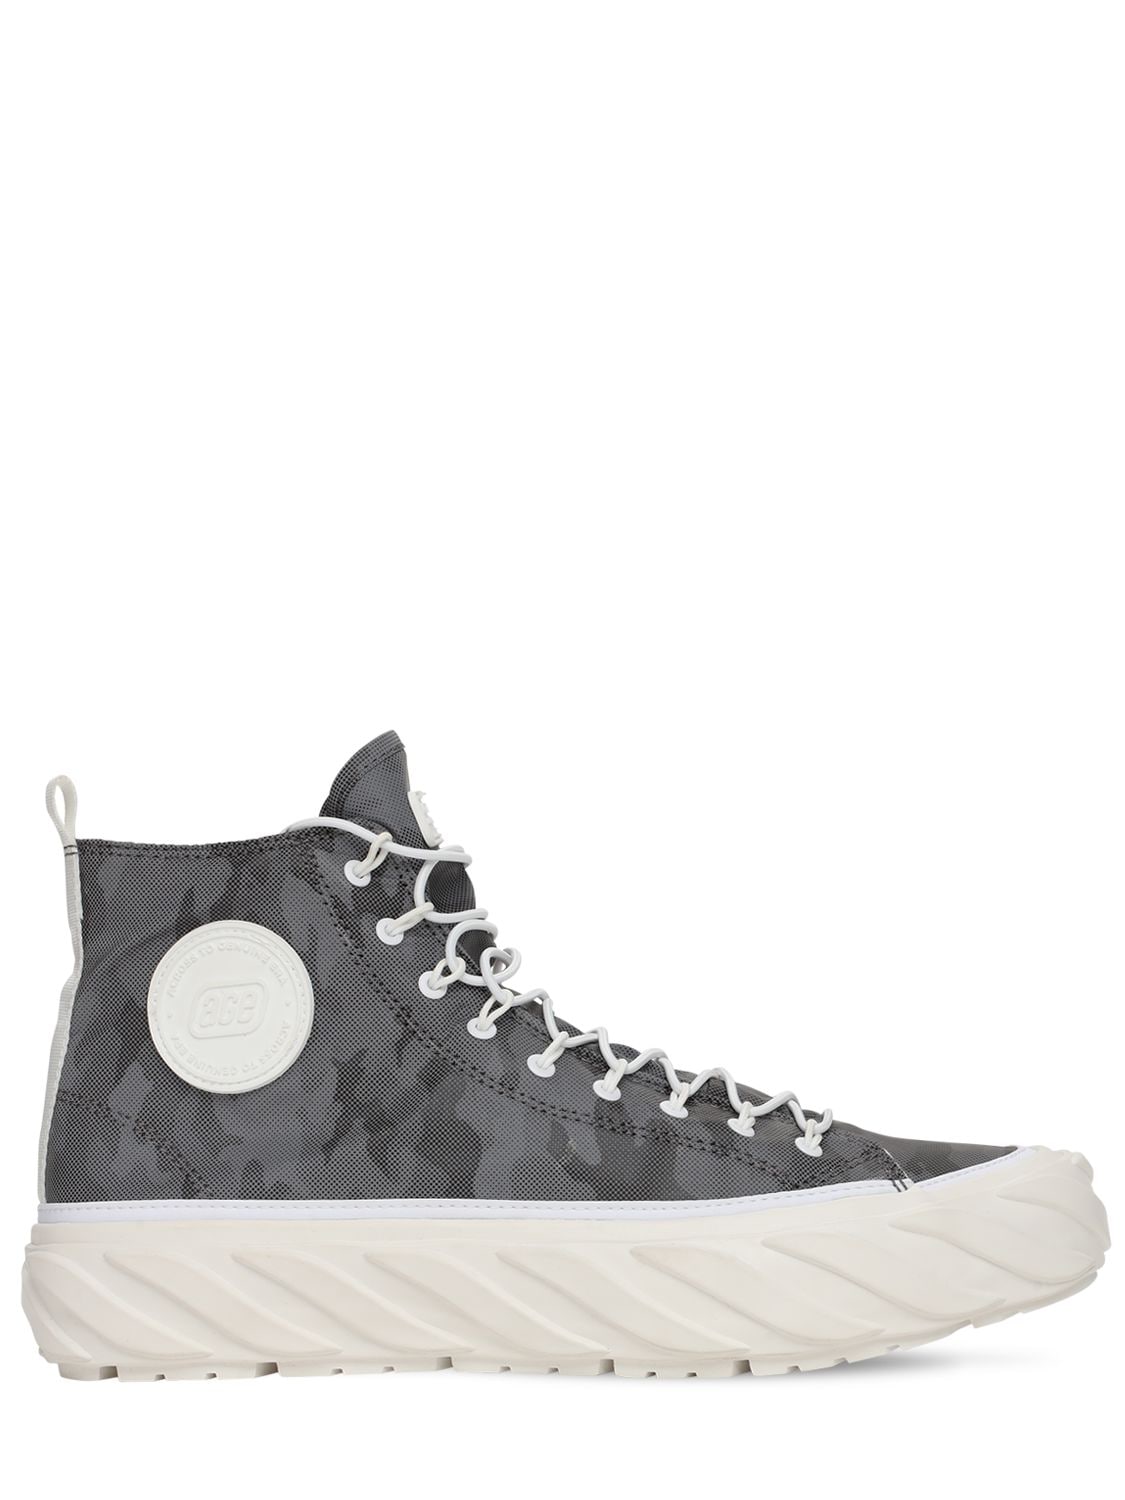 Age - Across To Genuine Era Carbon Coated Reflective High Sneakers In Reflective,grey